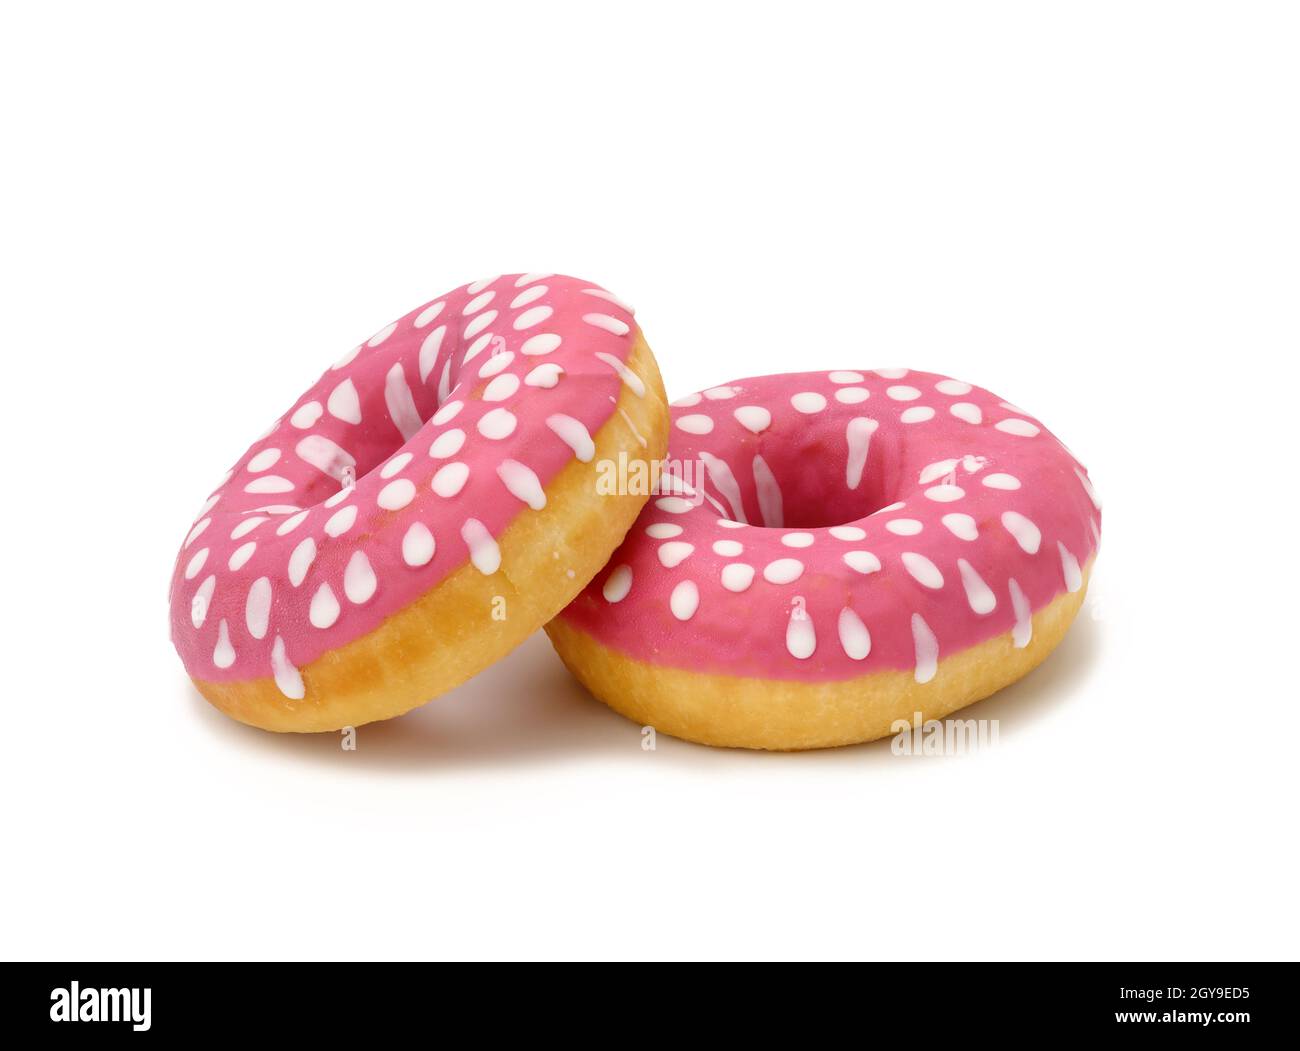 baked round donut with pink icing and white dots isolated on white background, close up Stock Photo